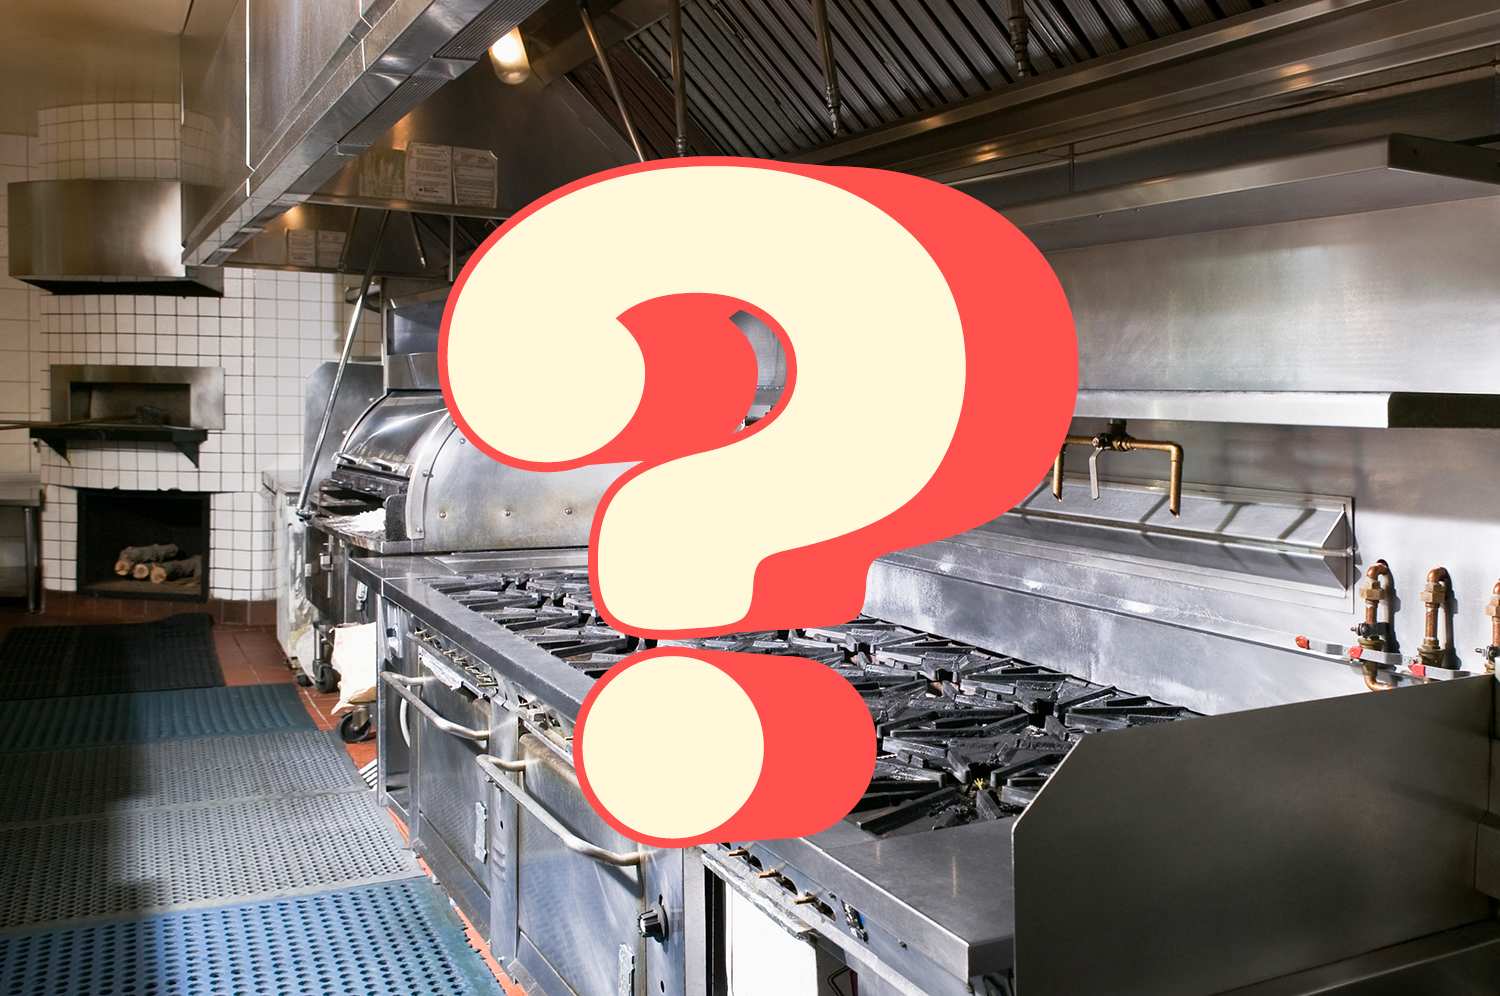 An empty restaurant kitchen, with a graphic of a question mark illustrated on top.